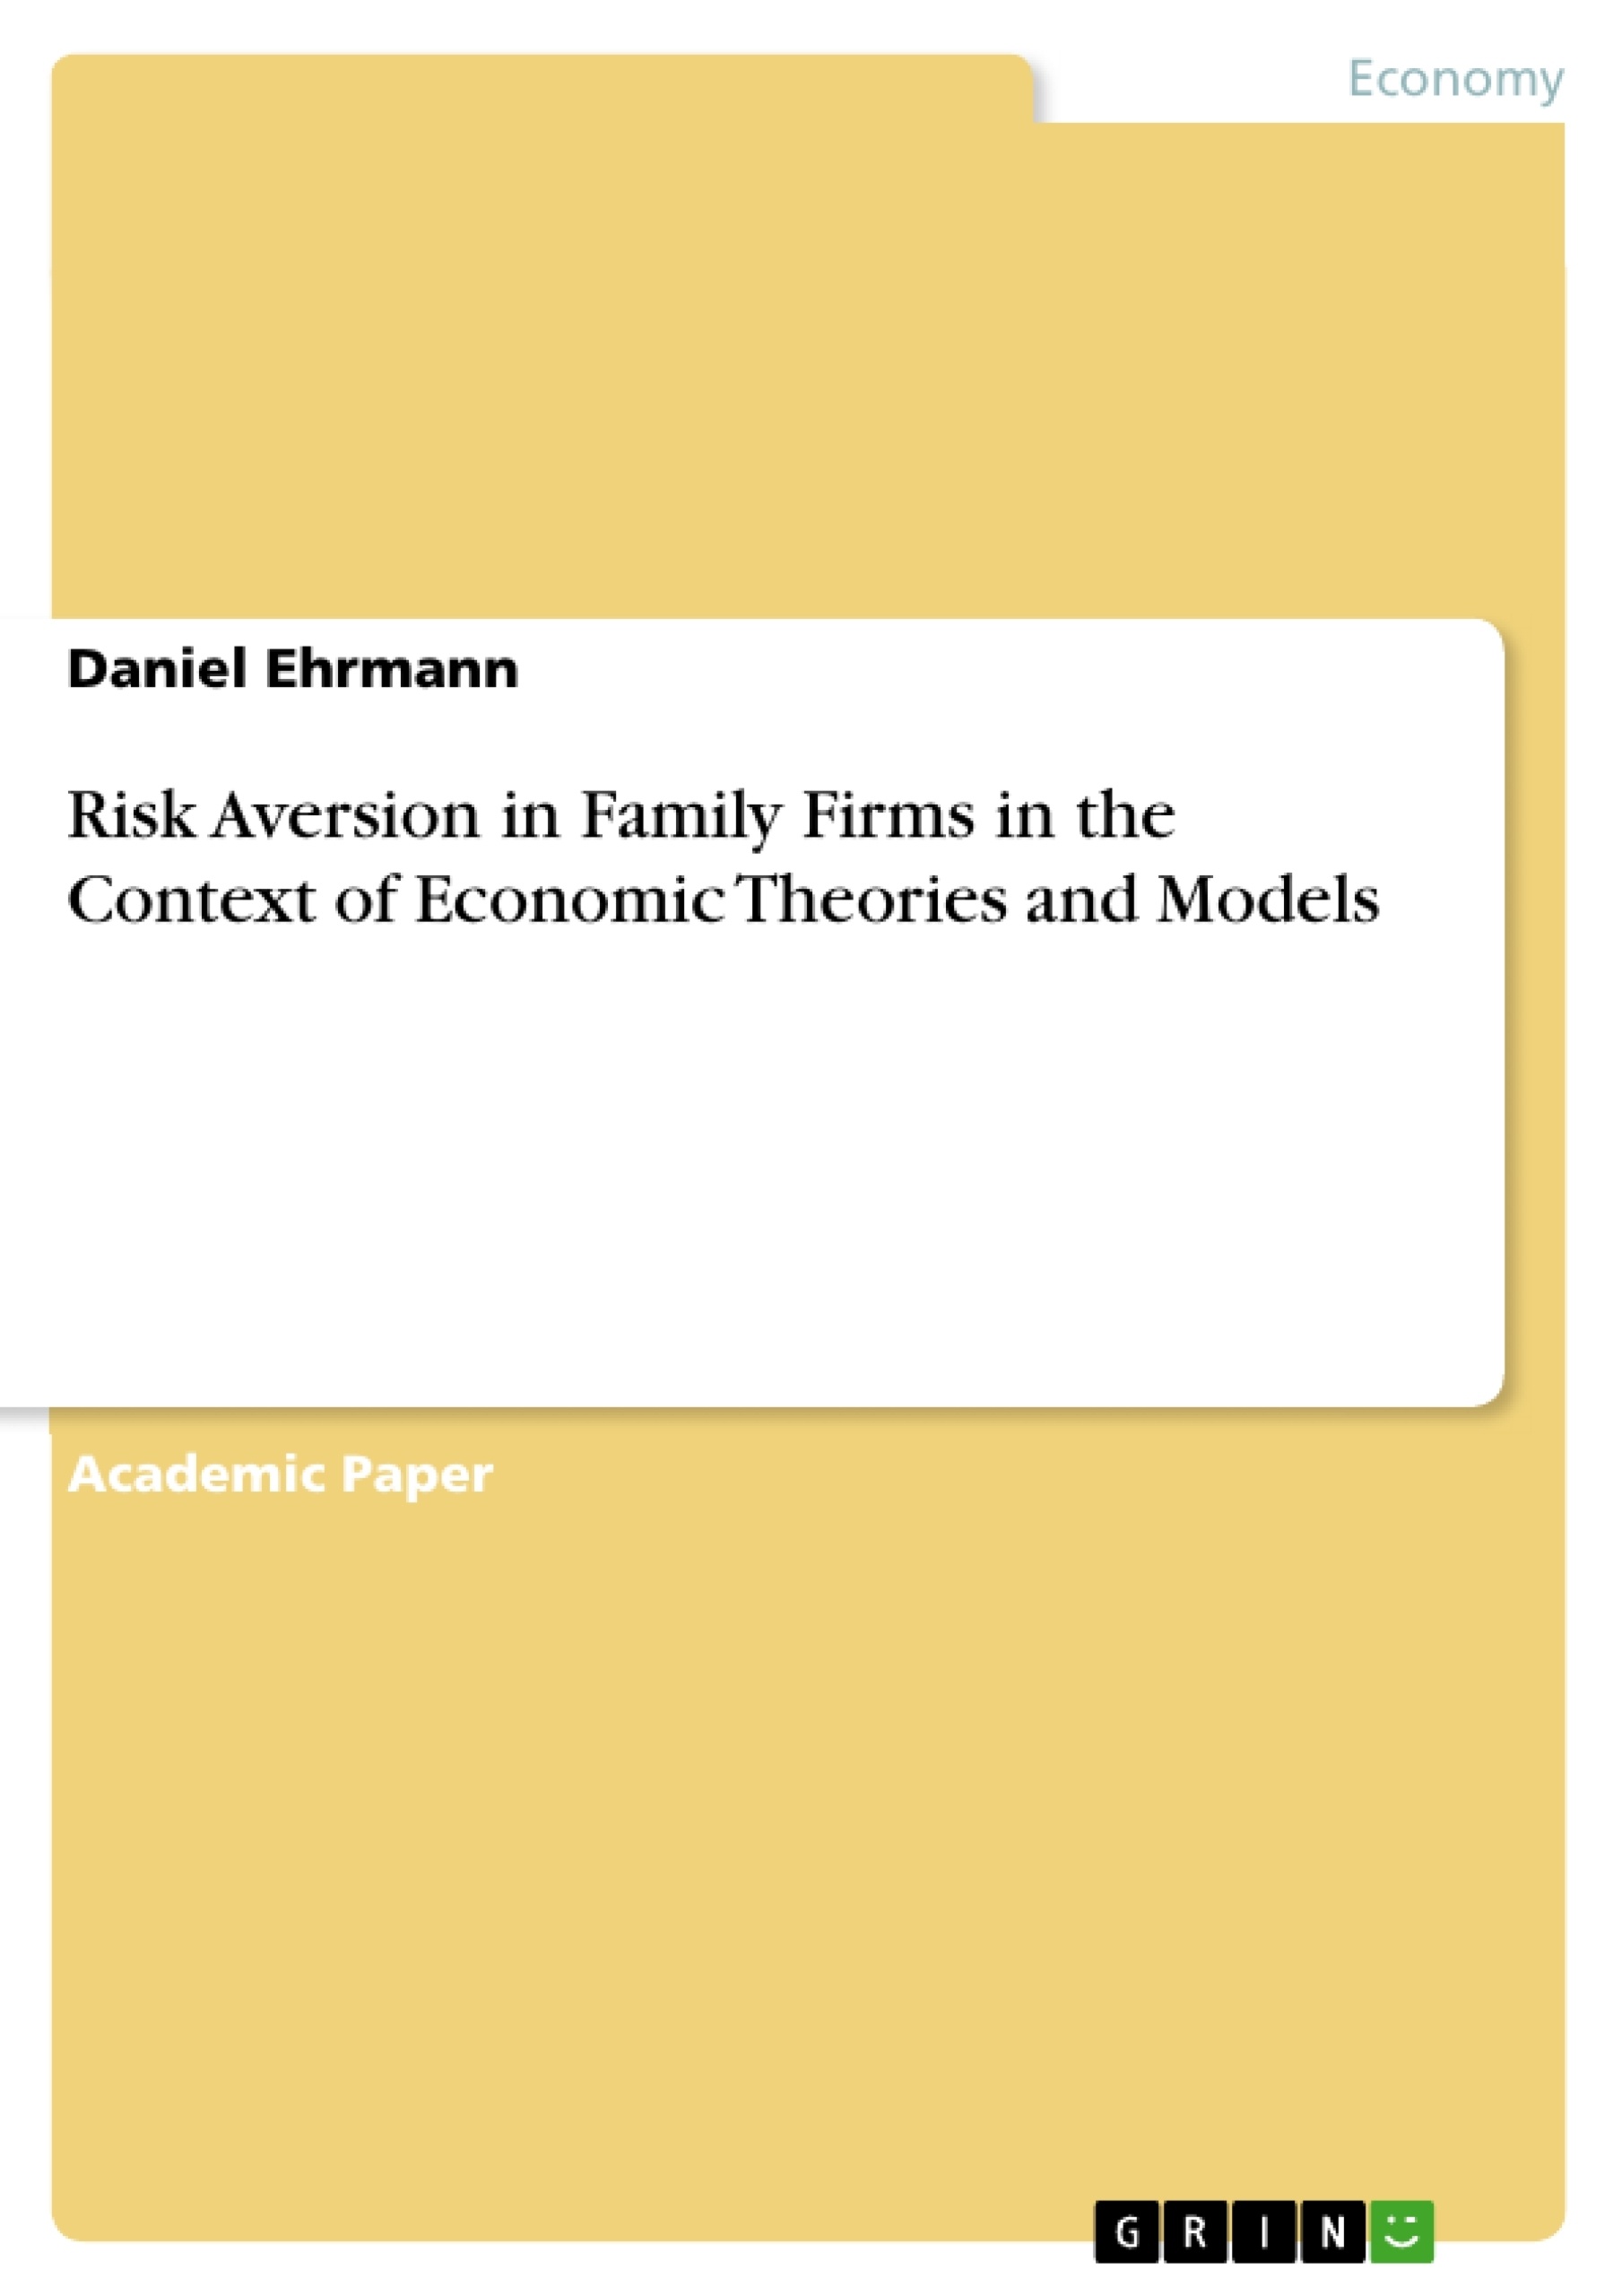 Título: Risk Aversion in Family Firms in the Context of Economic Theories and Models